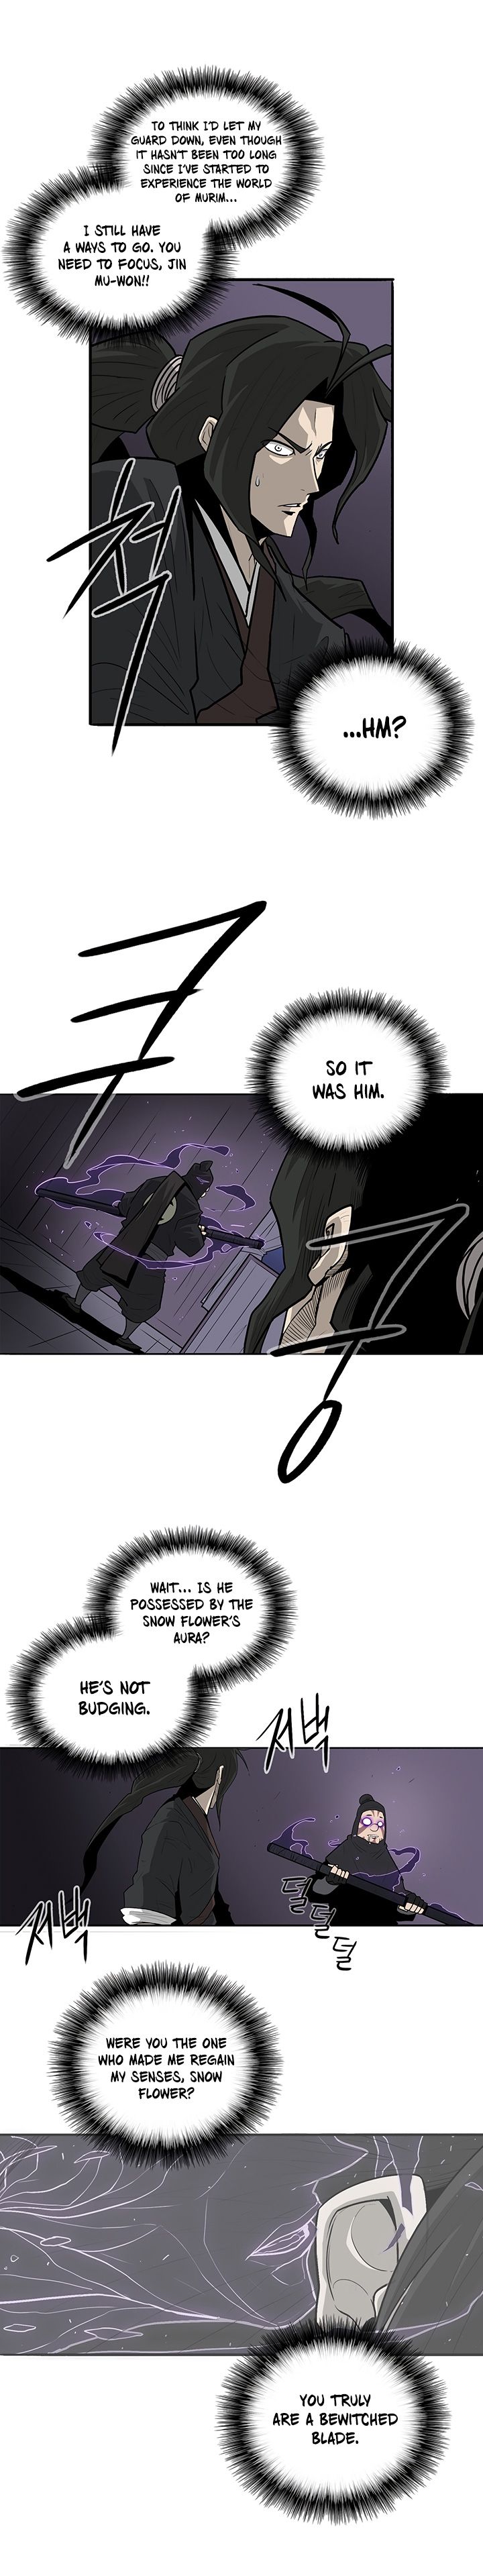 Legend of the Northern Blade chapter 40 page 5